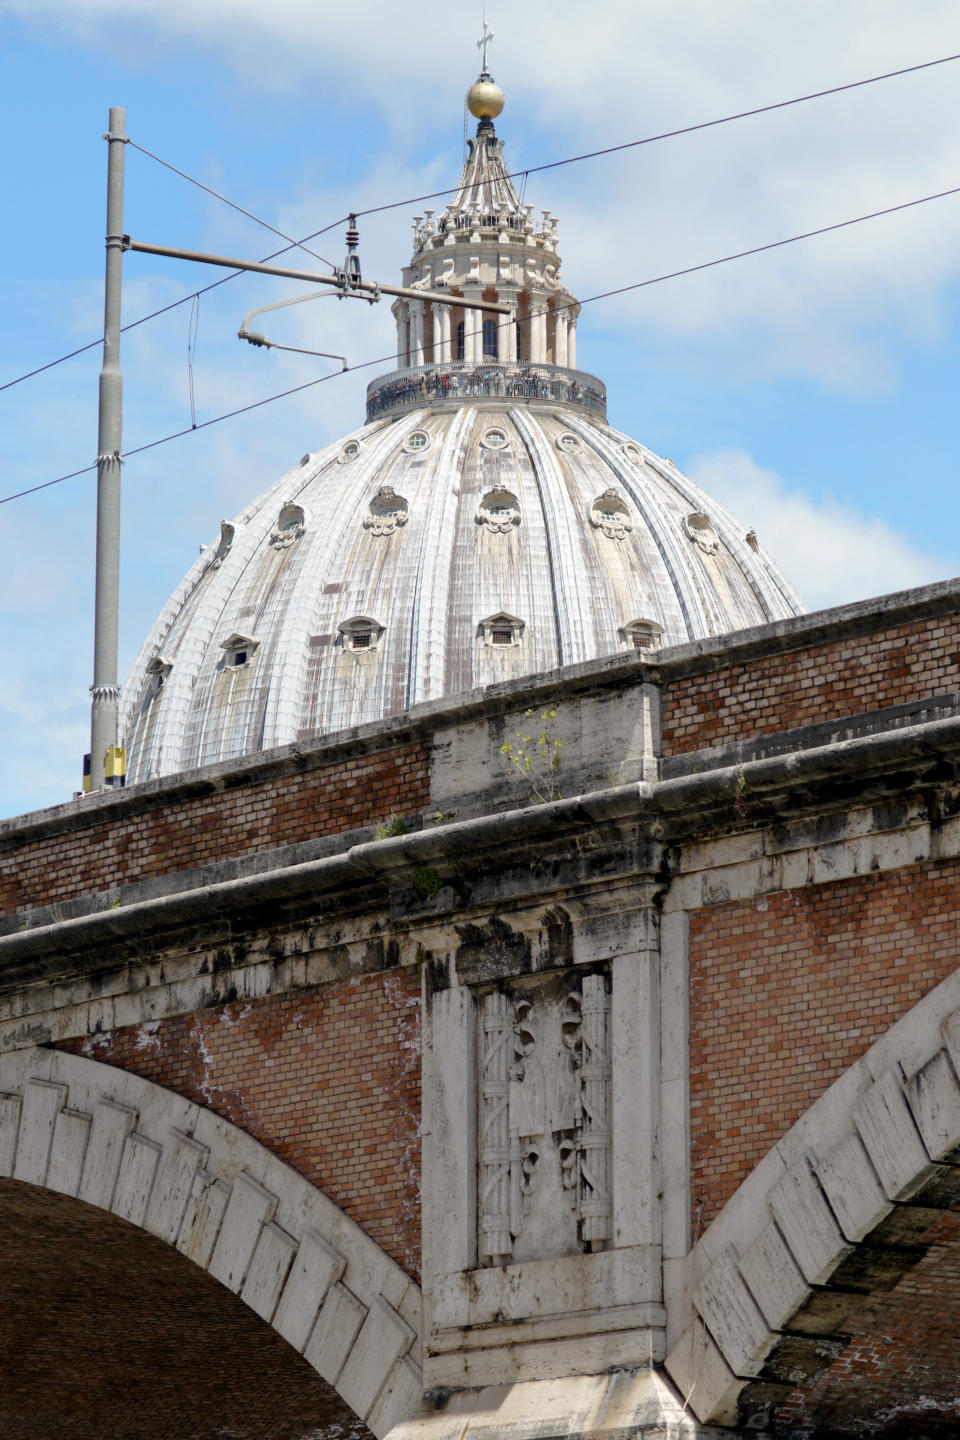 Fasces, a bundle of rods tied around an axe, the symbol which Italian dictator Benito Mussolini adopted from ancient Rome, are seen carved in a bridge by St. Peter's Basilica, in Rome, Monday, May 6, 2019. While Germany systematically wiped out traces of Adolf Hitler’s Nazi regime after World War II, the legacy of his Axis ally, Benito Mussolini, remains present in Italy even today. (AP Photo/Andrew Medichini)